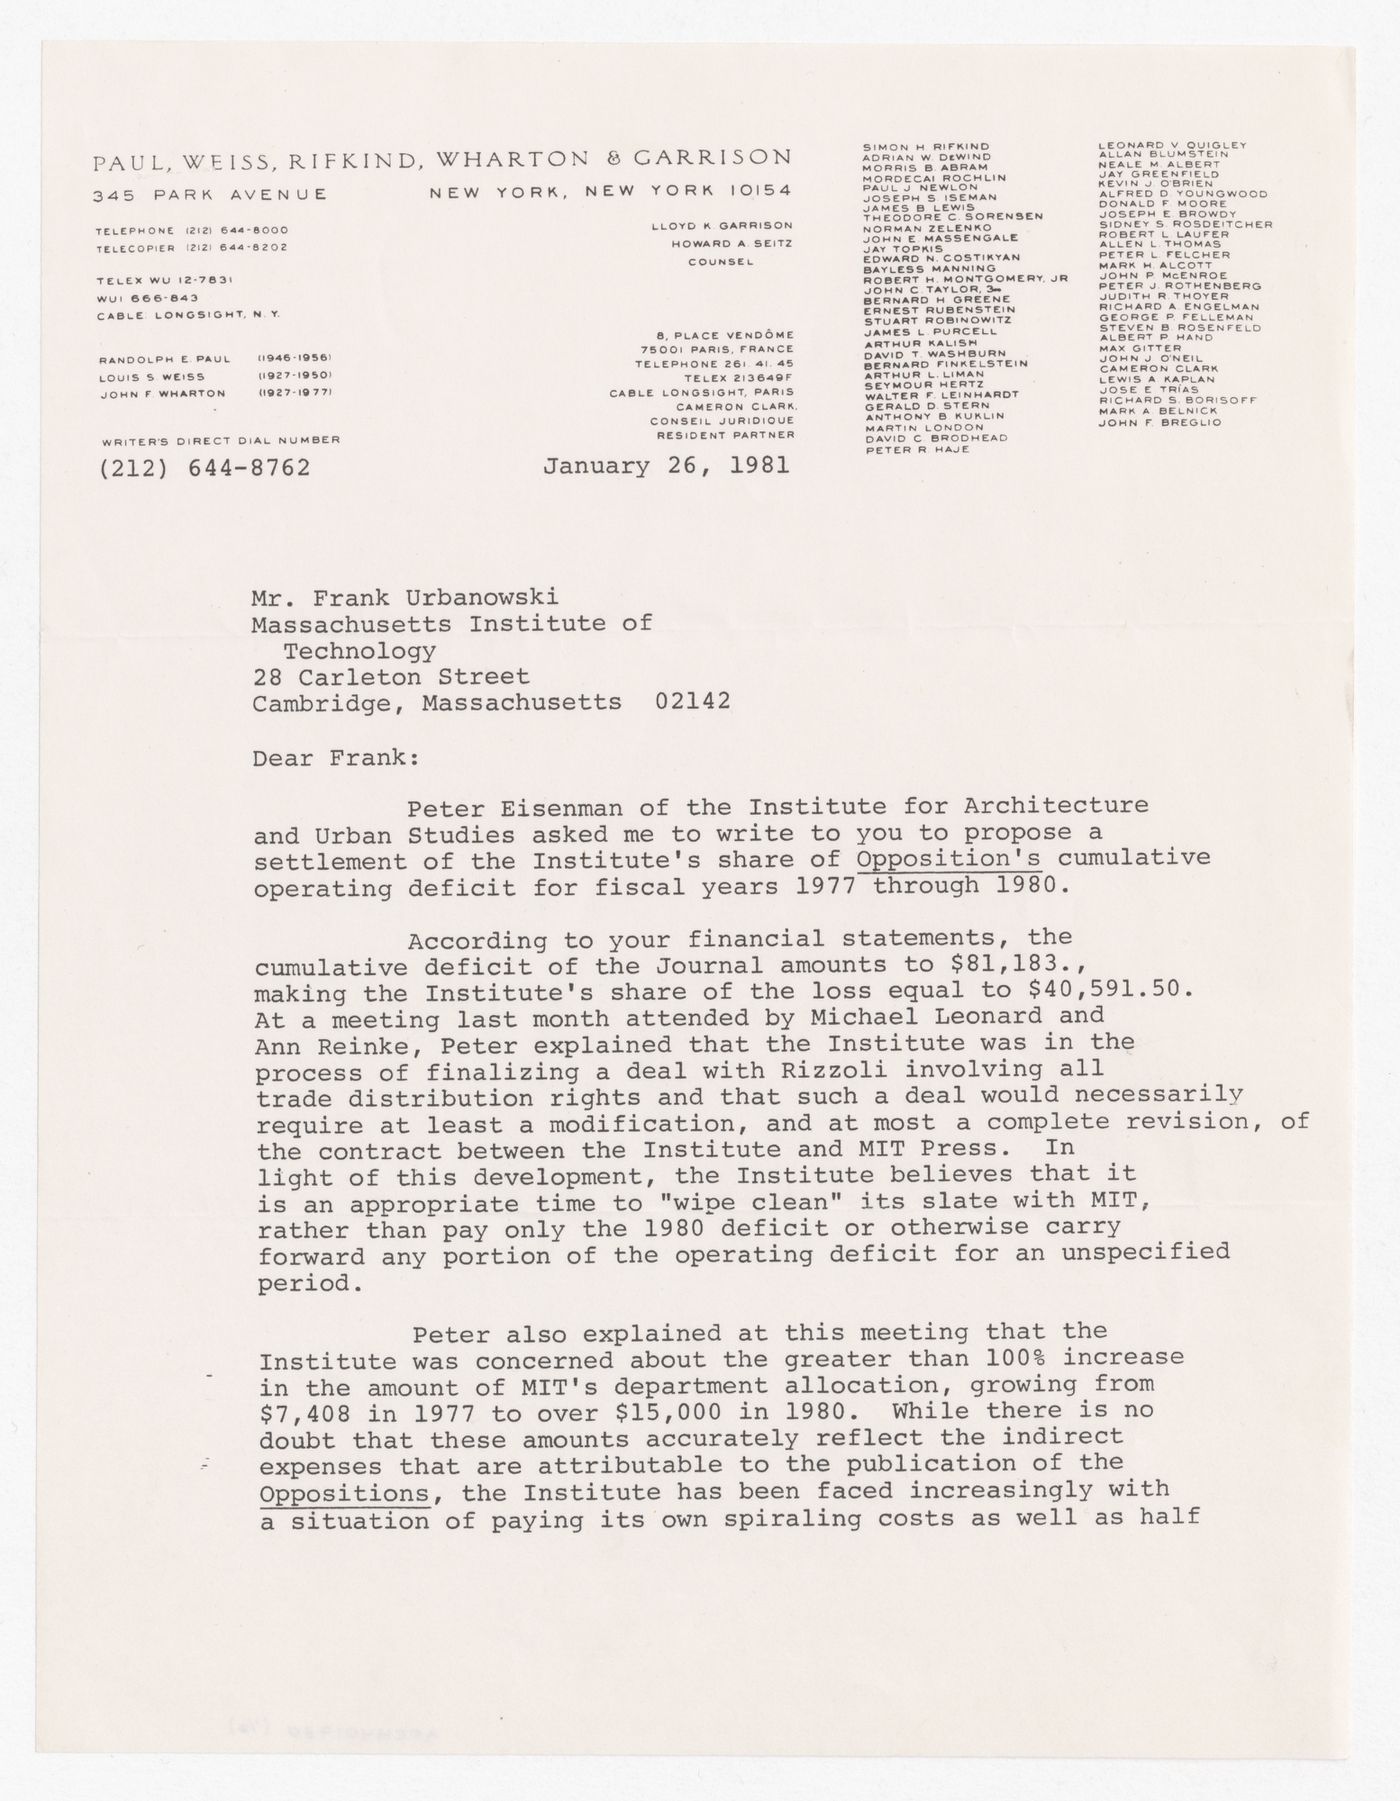 Letter from Michael C. Lasky to Frank Urbanowski about agreement between IAUS and MIT Press to address the cumulative operating deficit for Oppositions Journal for 1977-1980